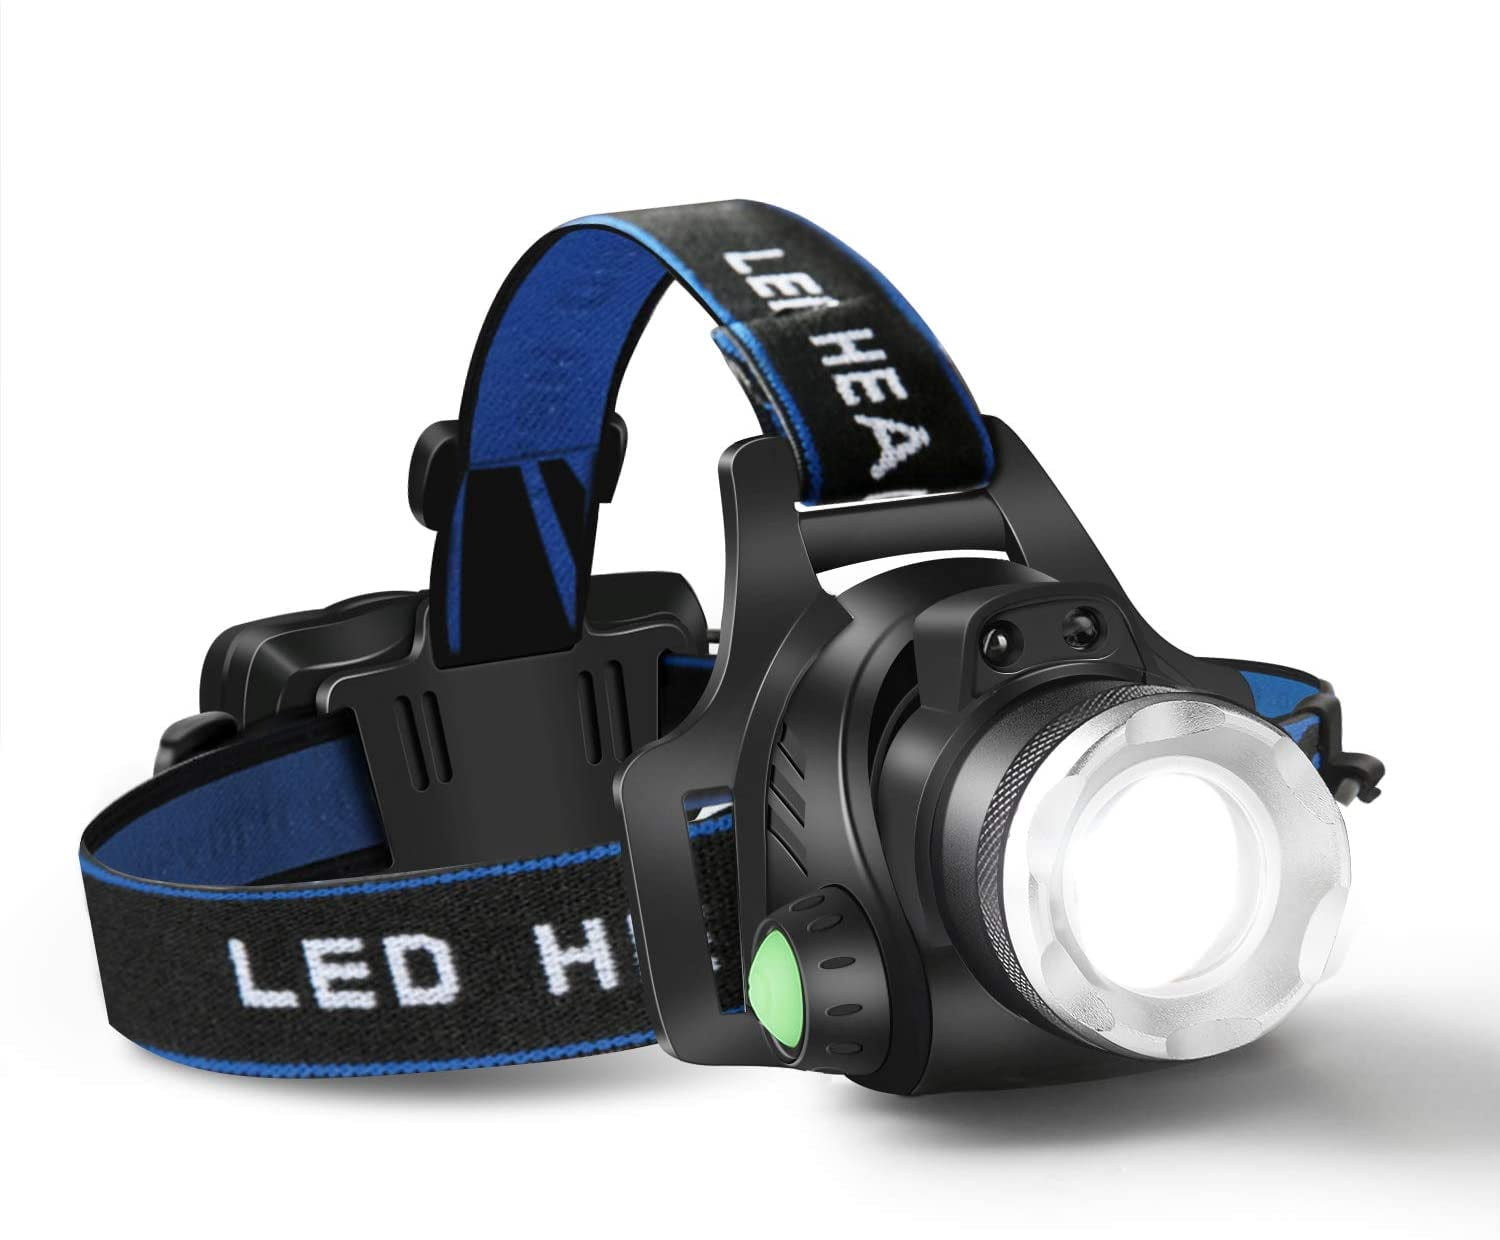 Led Focus Head Light Rechargeable Head Torch Running Camping Waterproof Headlamp 